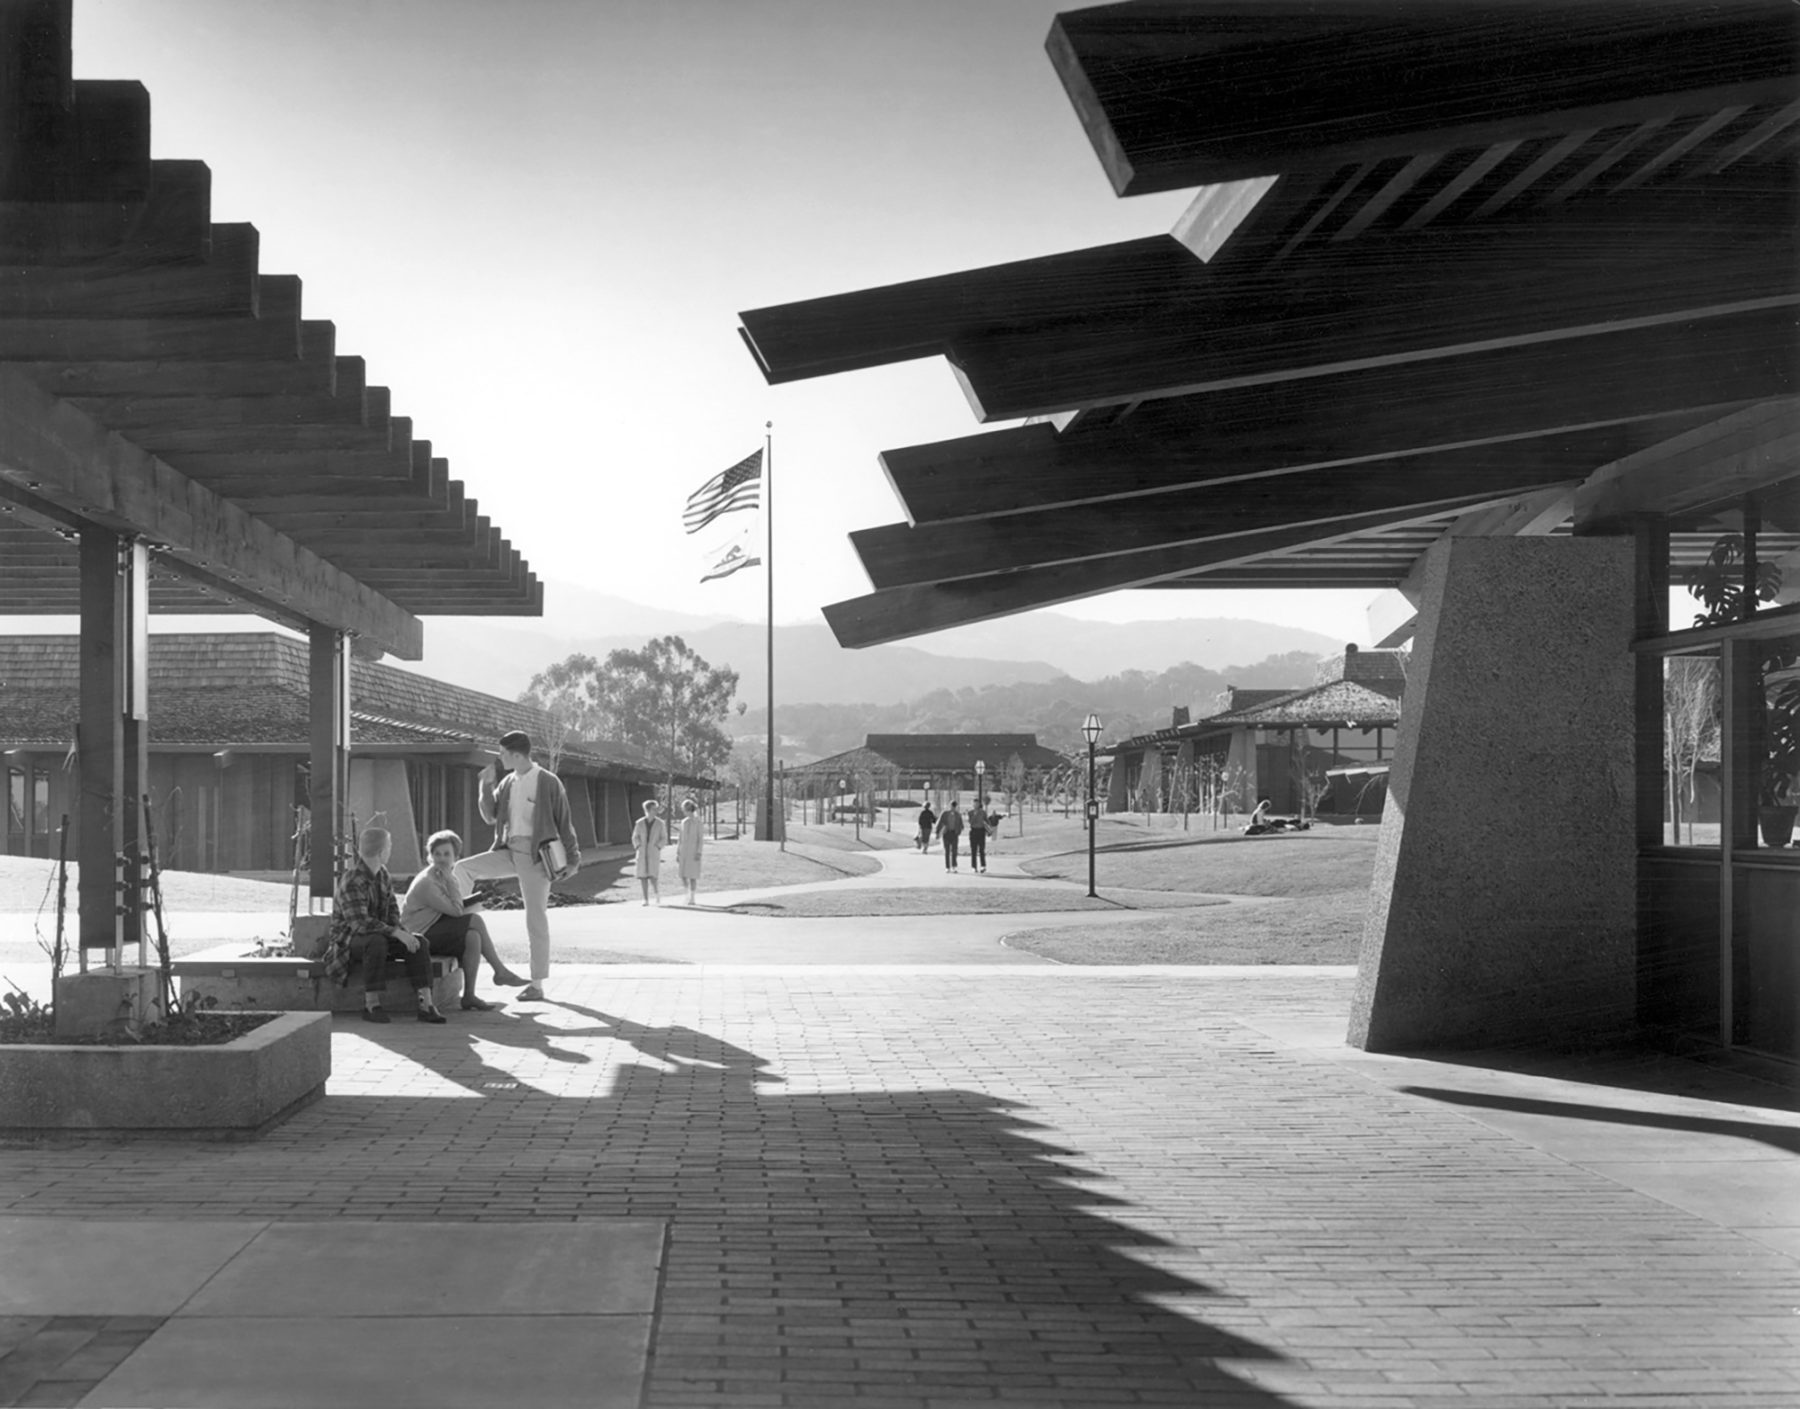 Black and white photo of students sitting in an outdoor courtyard between two buildings